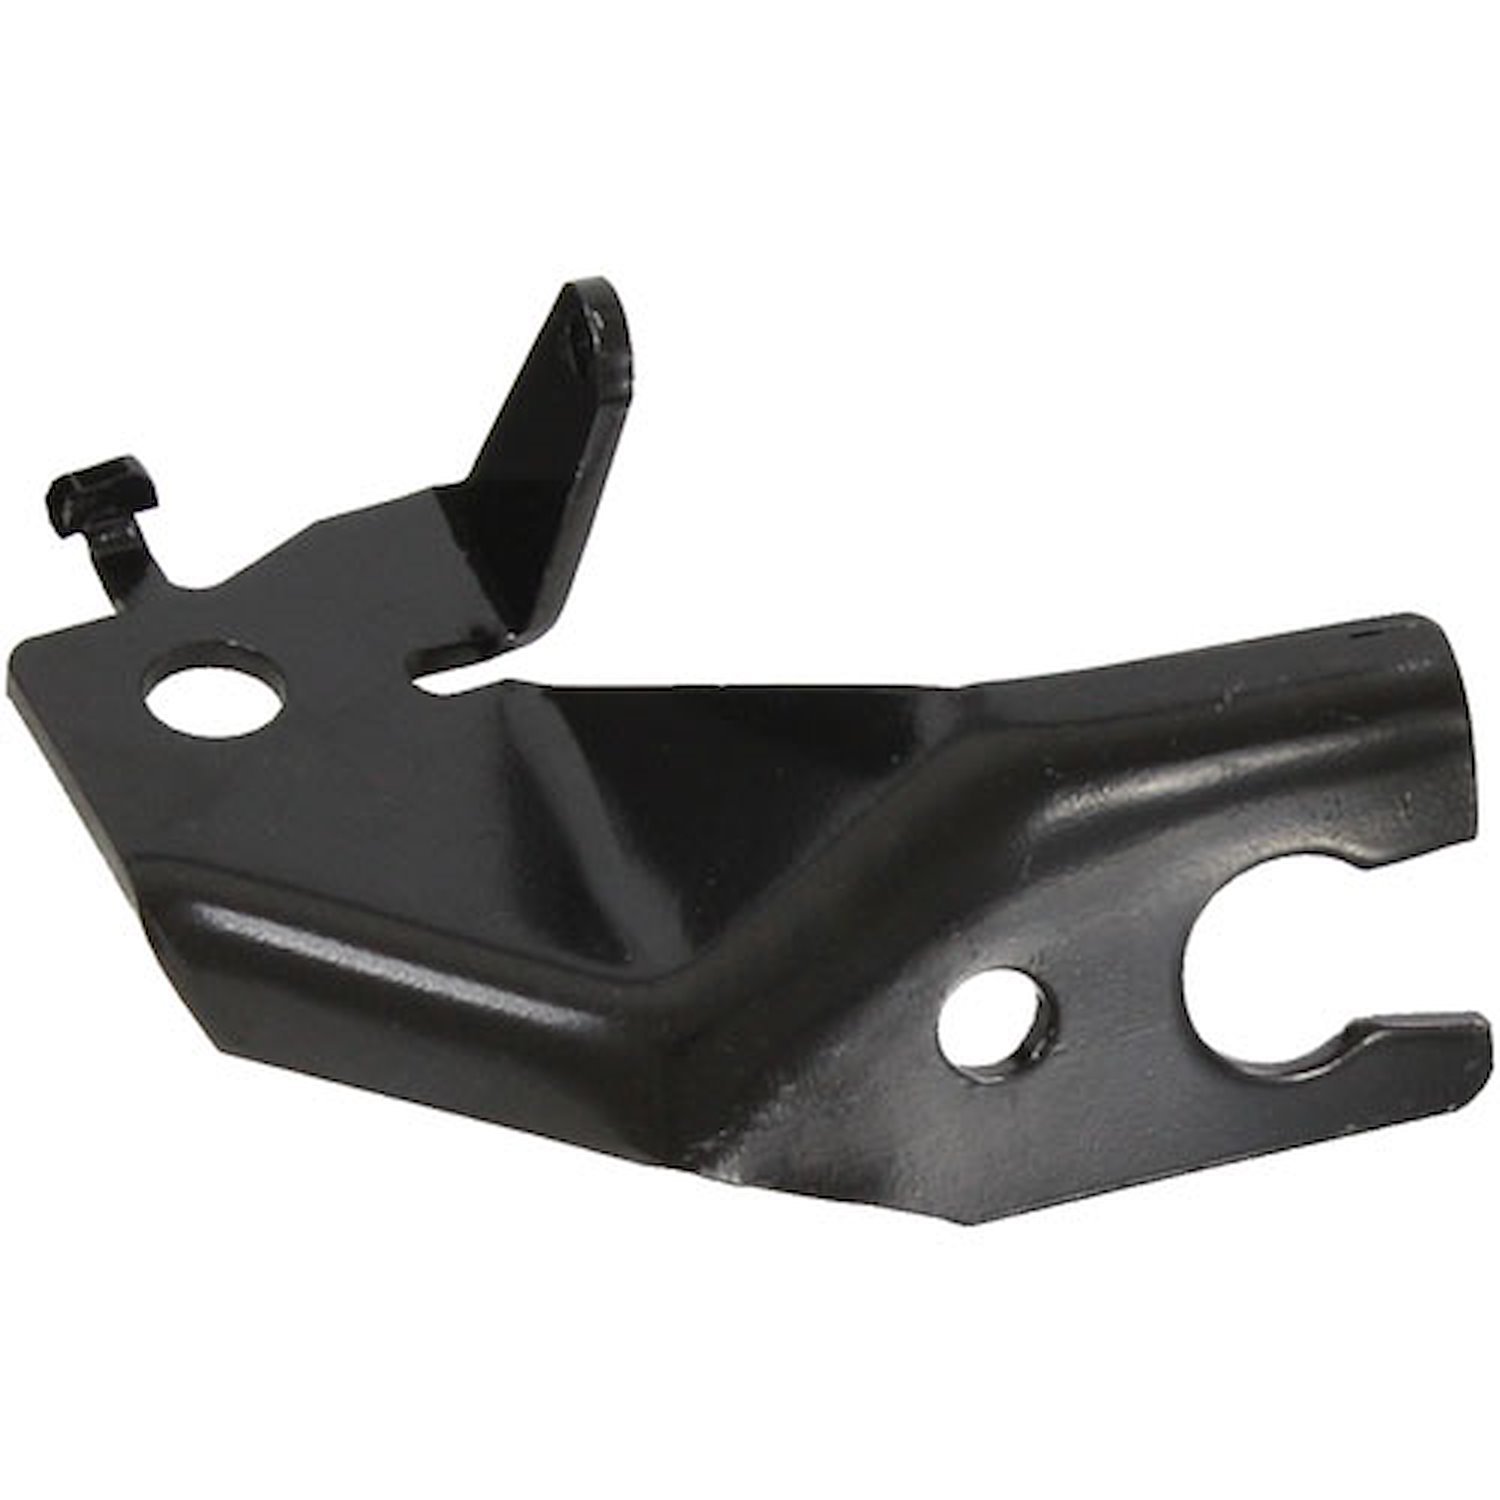 Accelerator Cable Bracket for 1970-1972 Chevy Chevelle, El Camino, Monte Carlo [Steel]